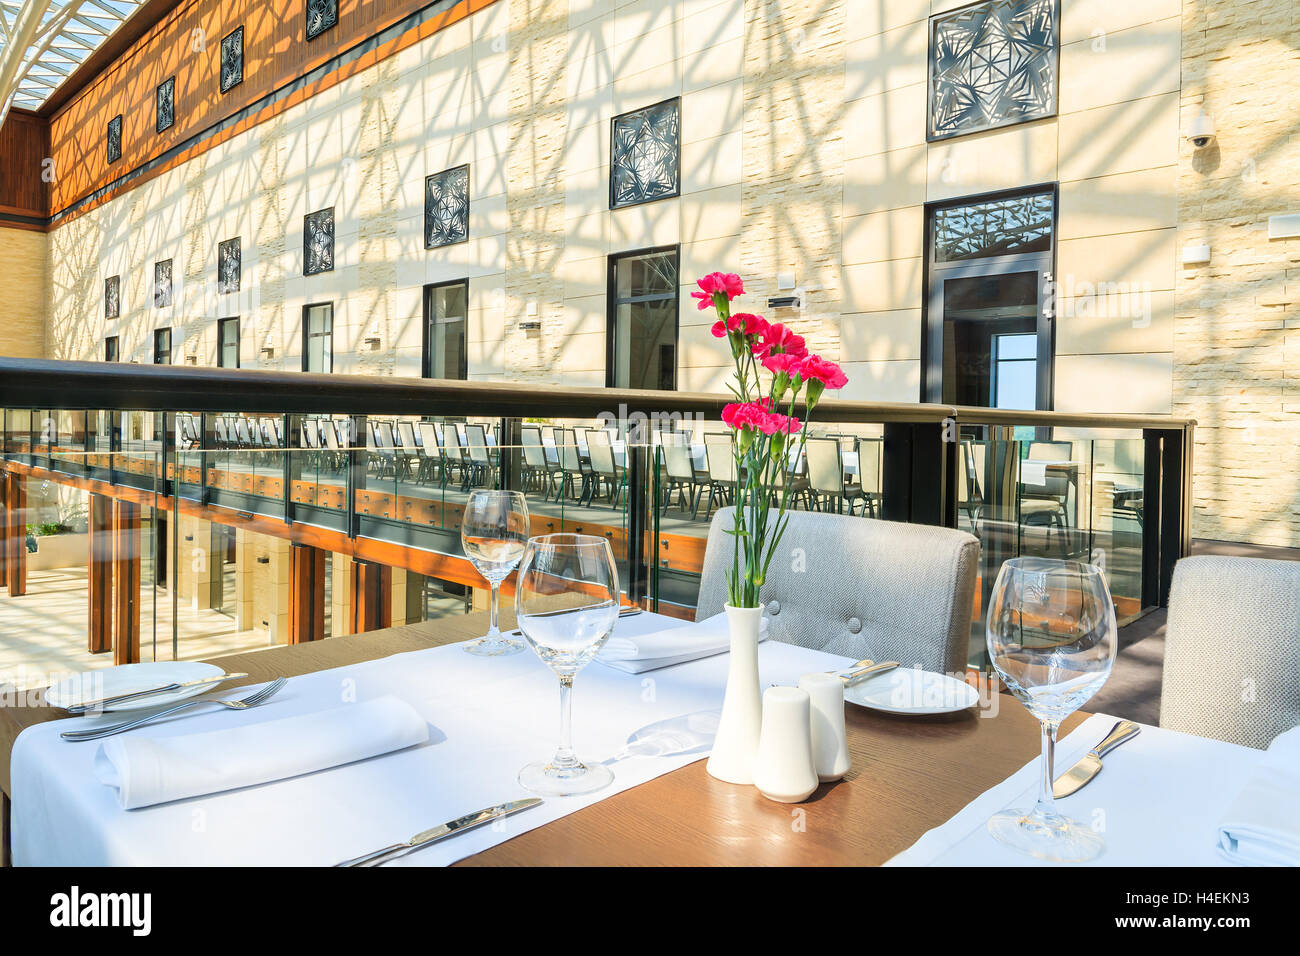 ARLAMOW HOTEL, POLAND - AUG 3, 2014: tables in beautiful open lobby restaurant in Arlamow Hotel. This luxury resort was owned by Stock Photo